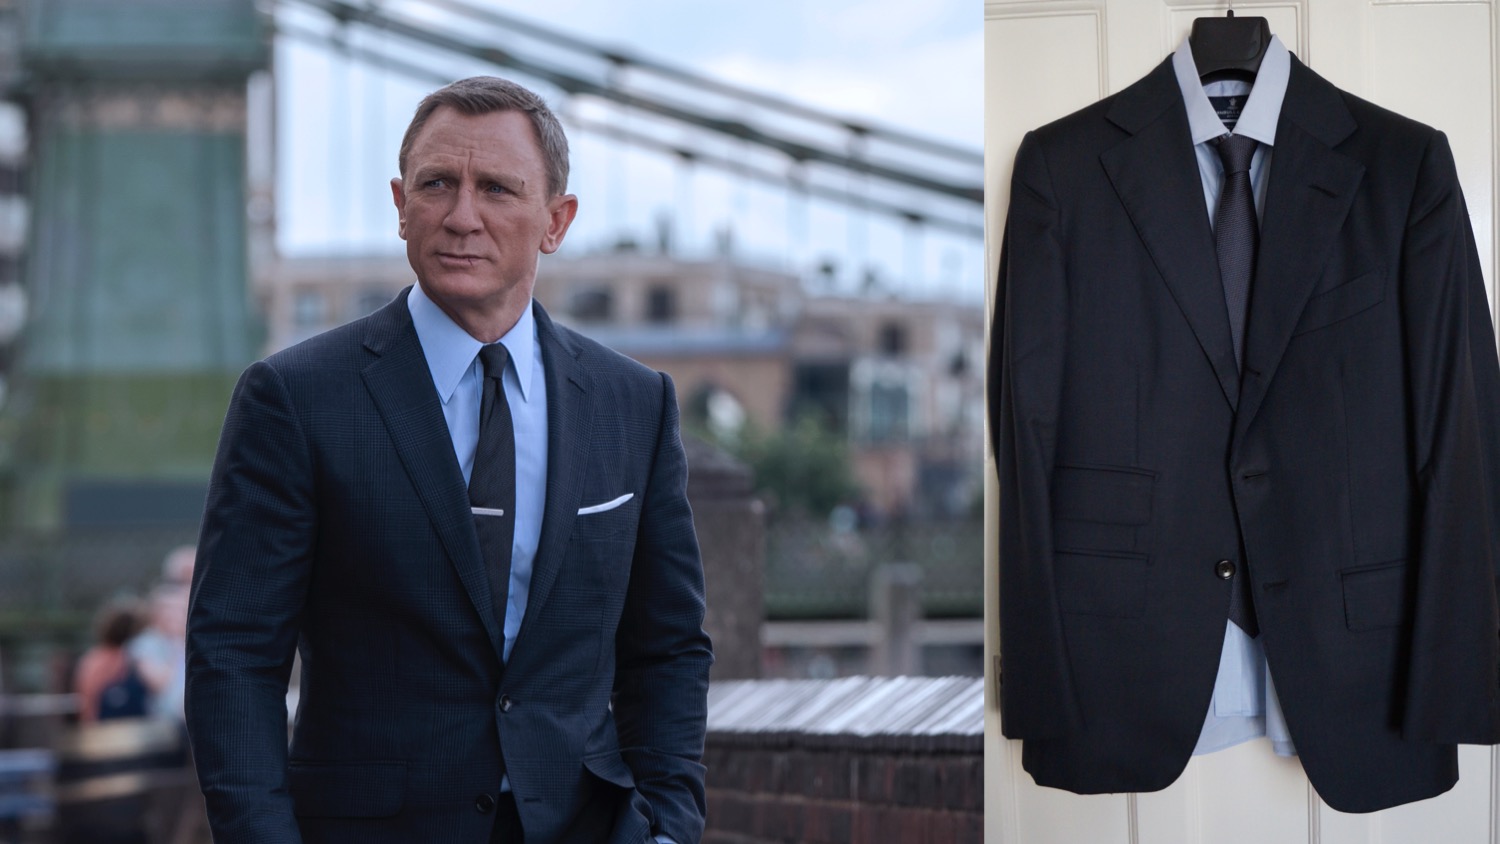 Daniel Craig in Hammersmith wearing a prada tie and comparison to the tie and suit